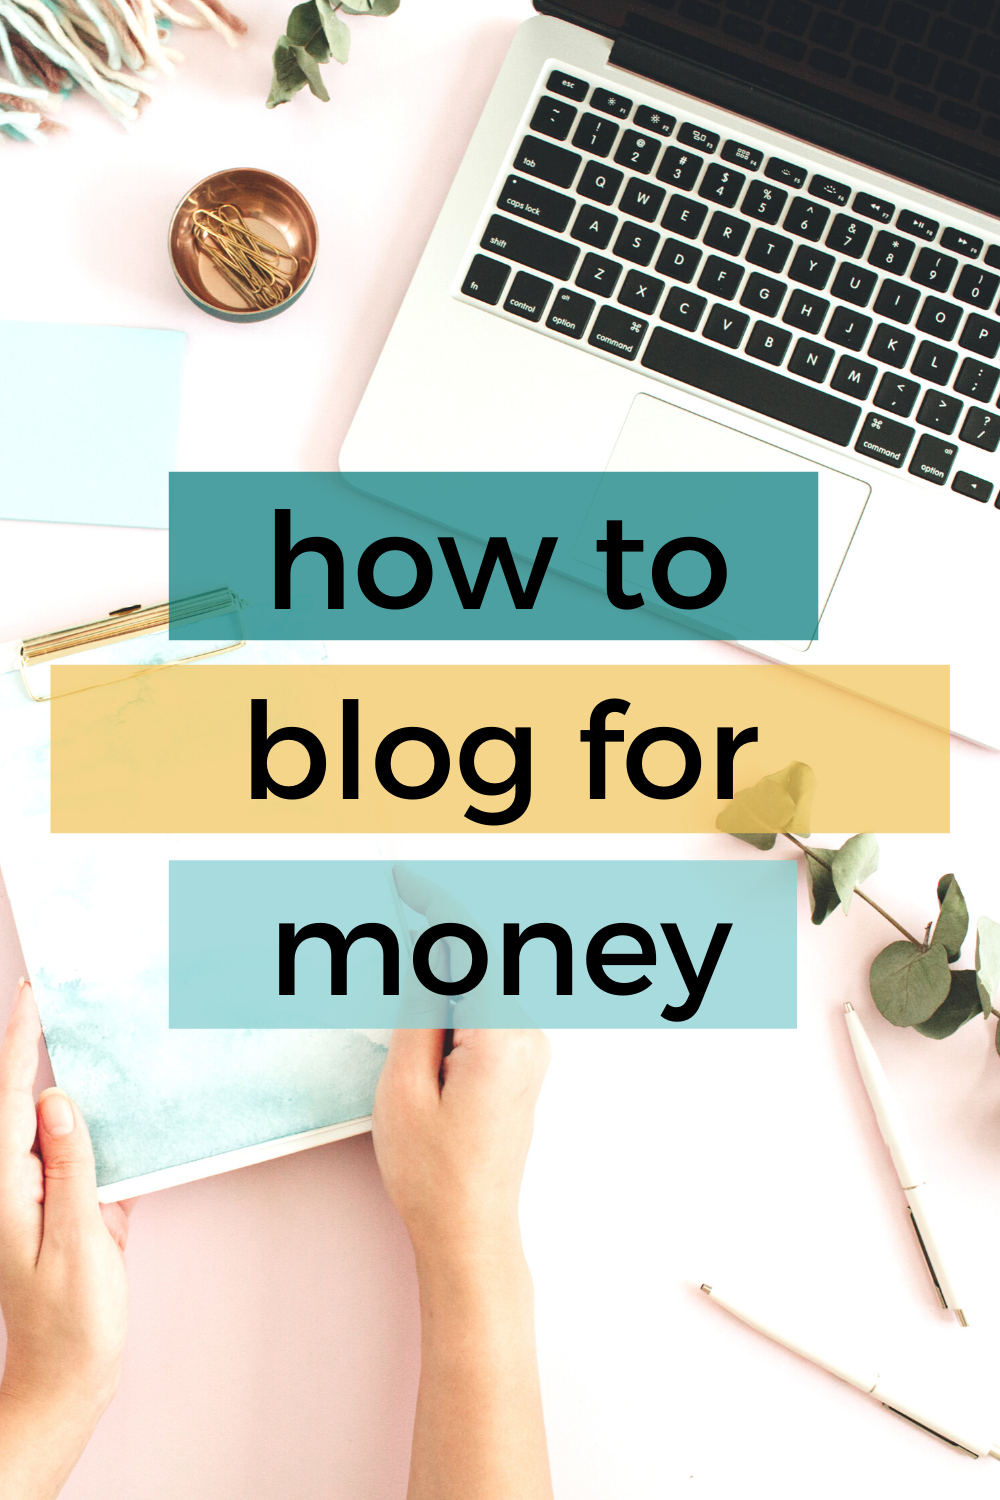 Blog For Money: How To Make Money With A Blog